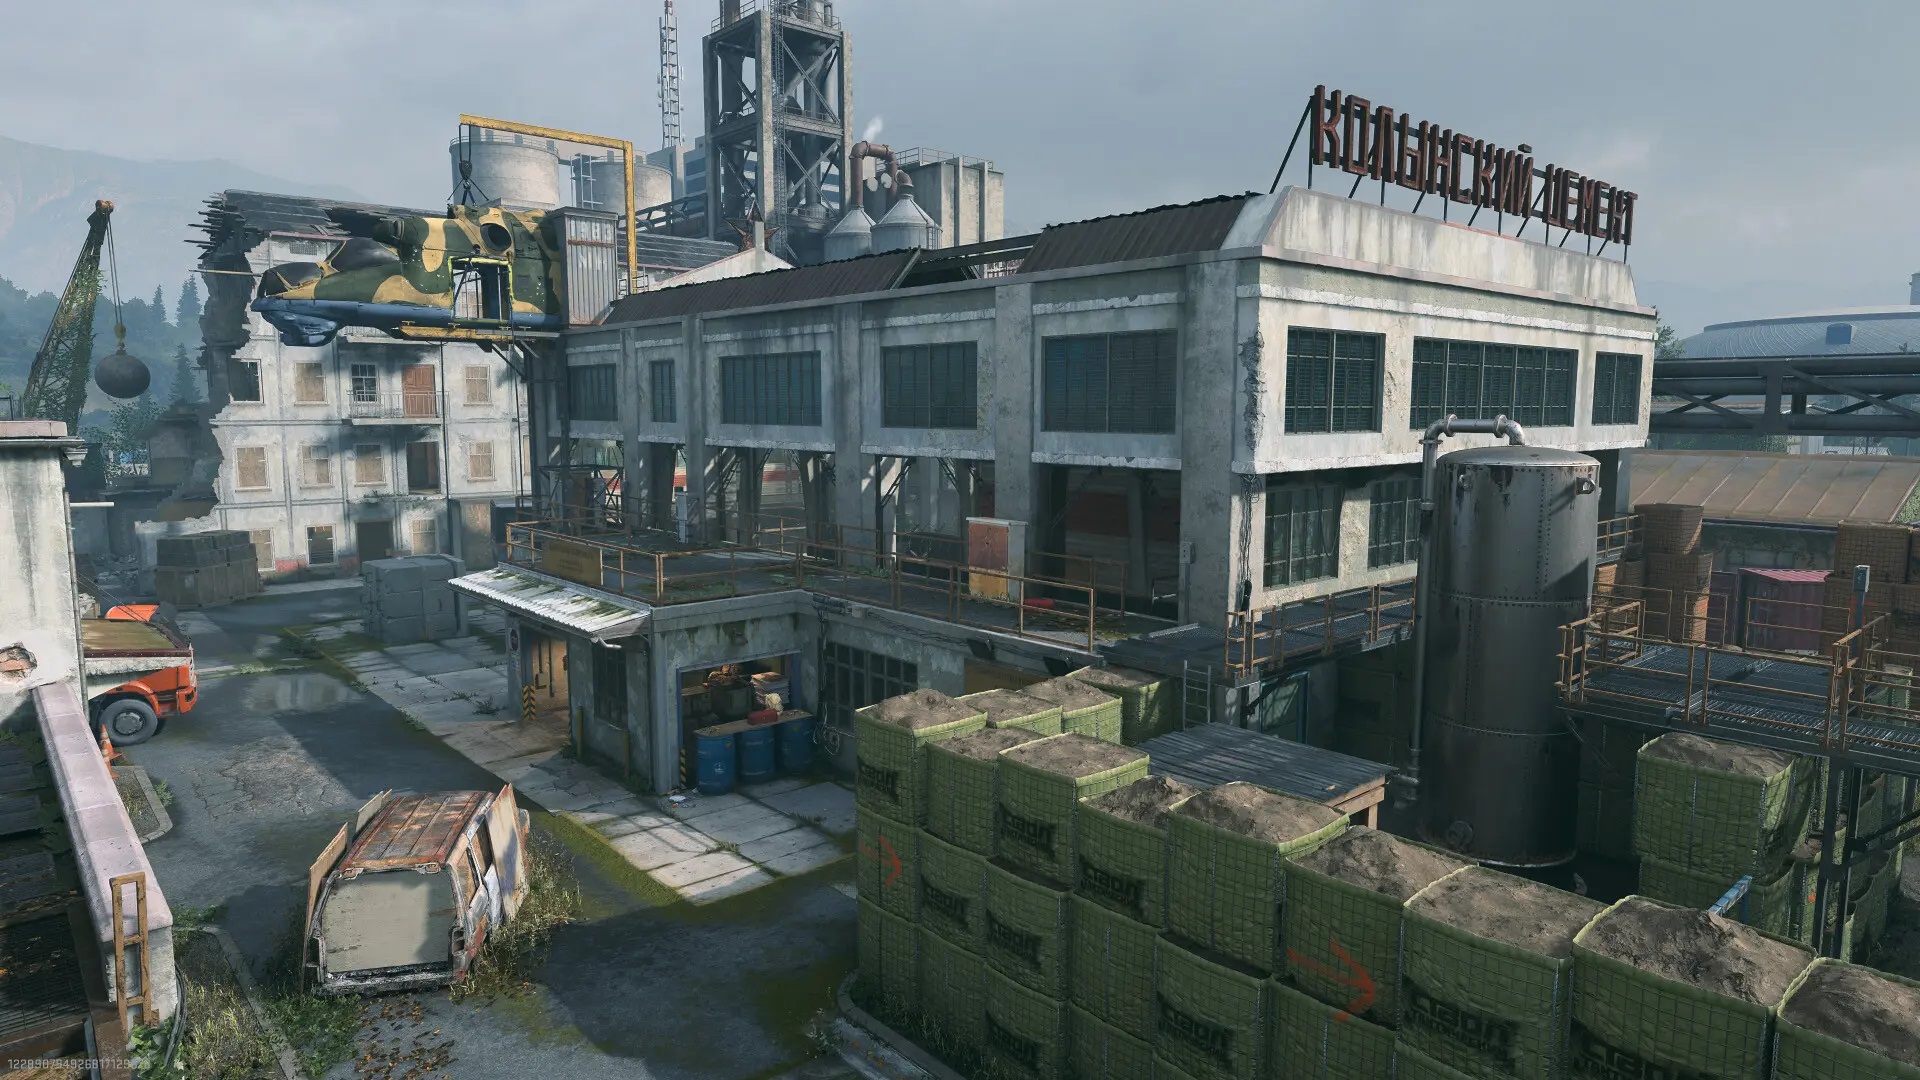 User finds Modern Warfare 2 map is surrounded by secret city